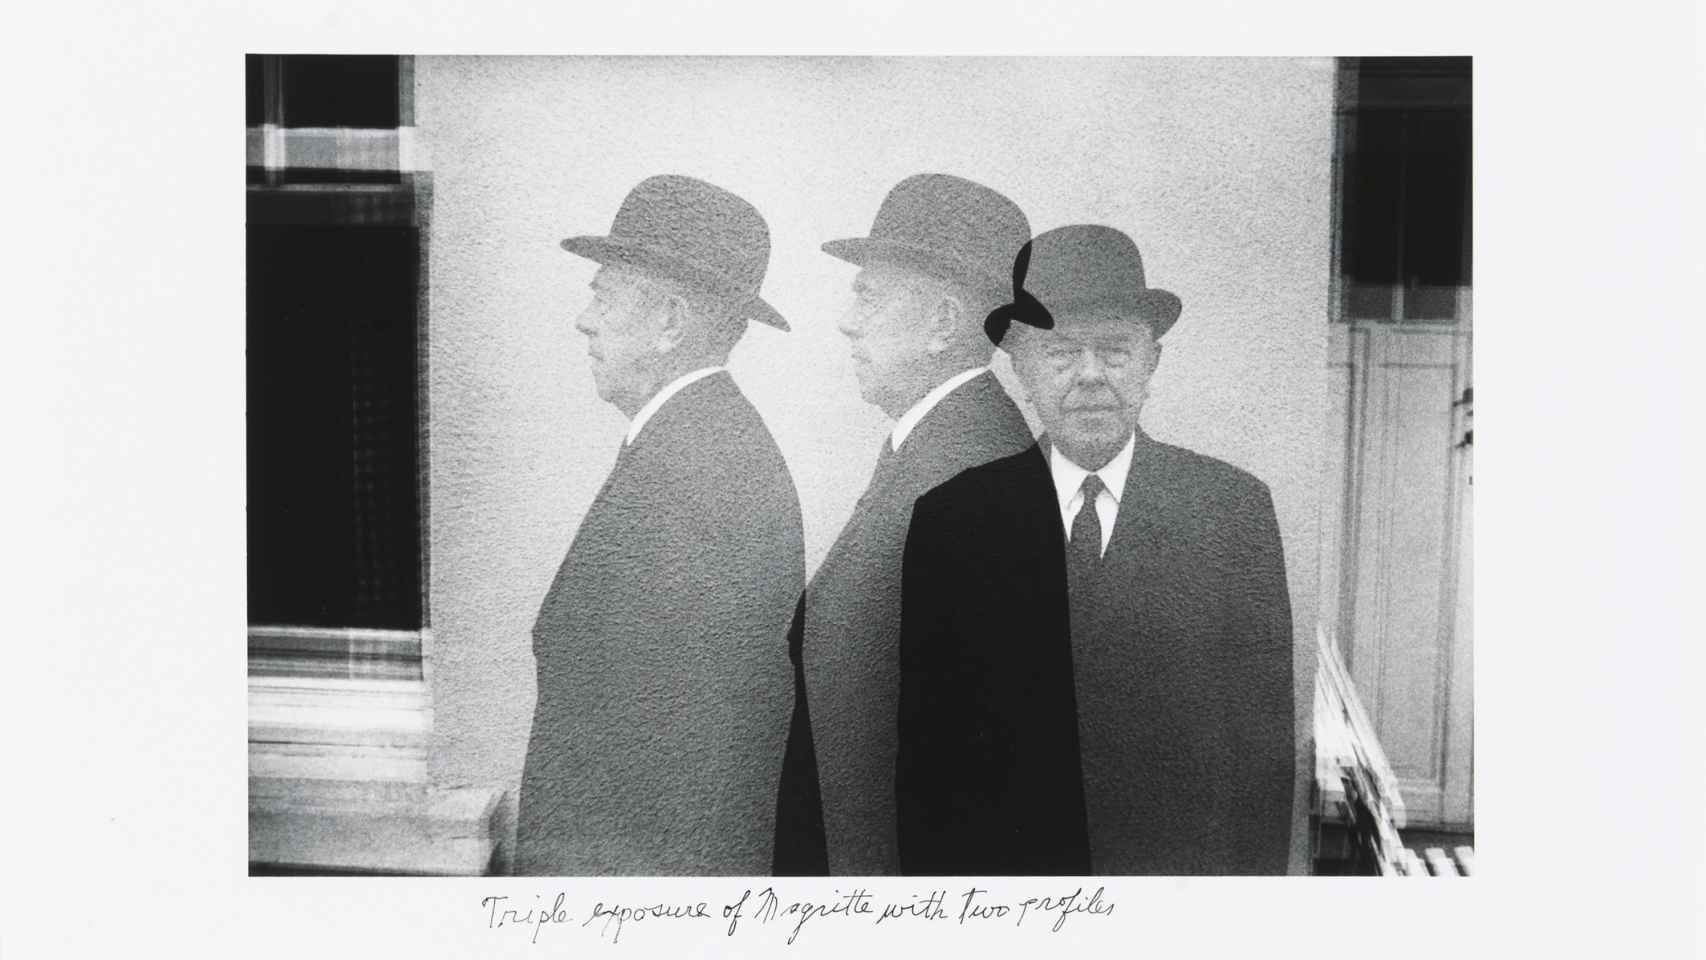 Triple Exposure of Magritte with Two Profiles, Duane Michals (1965)  (Succession of Michals Duane).